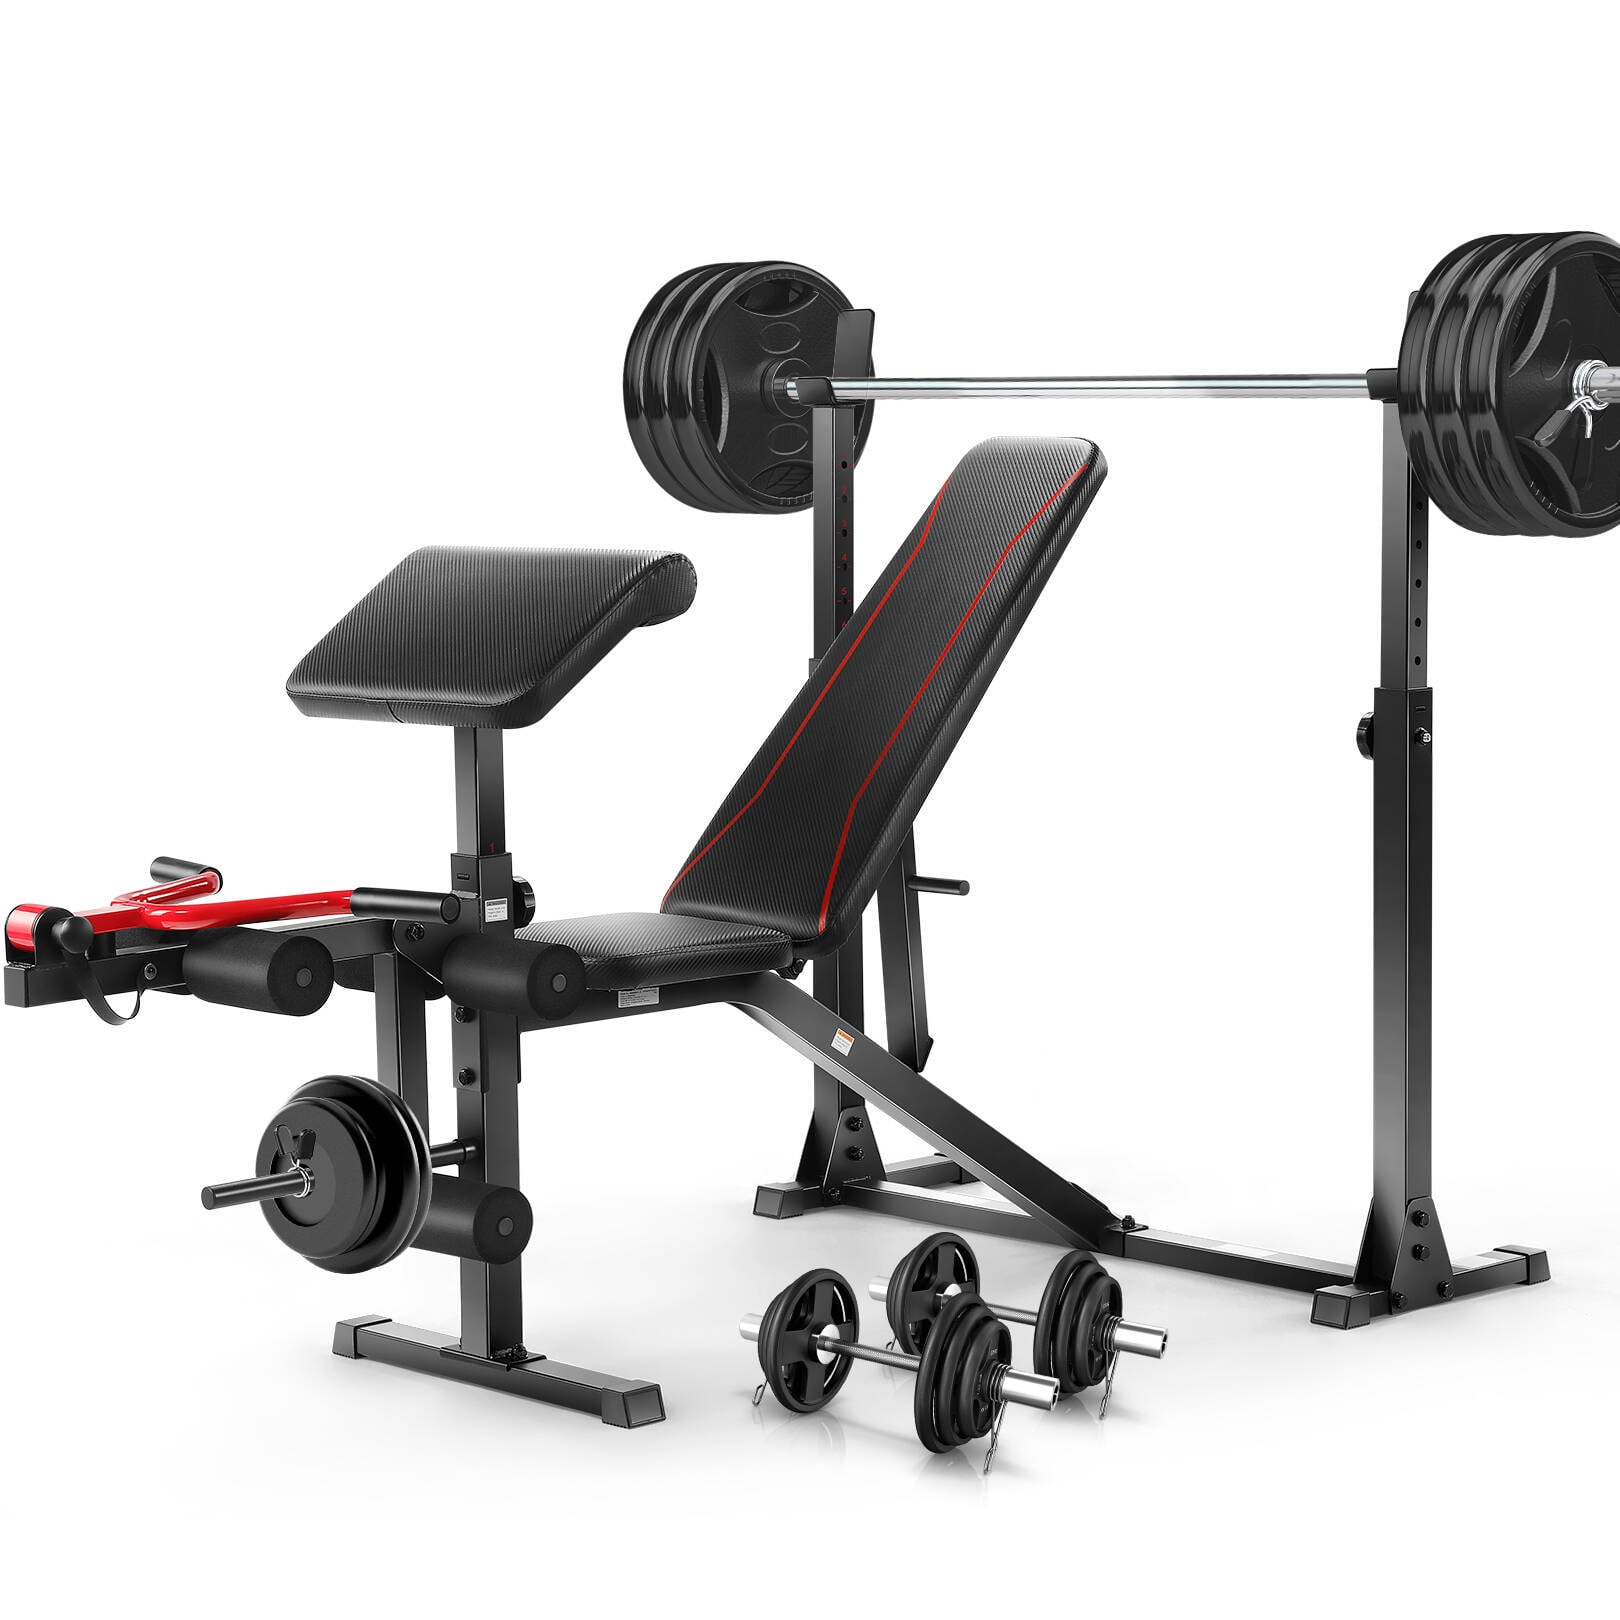 PROFLEX Home Gym Exercise Equipment Weight Machine Station Fitness Bench Set